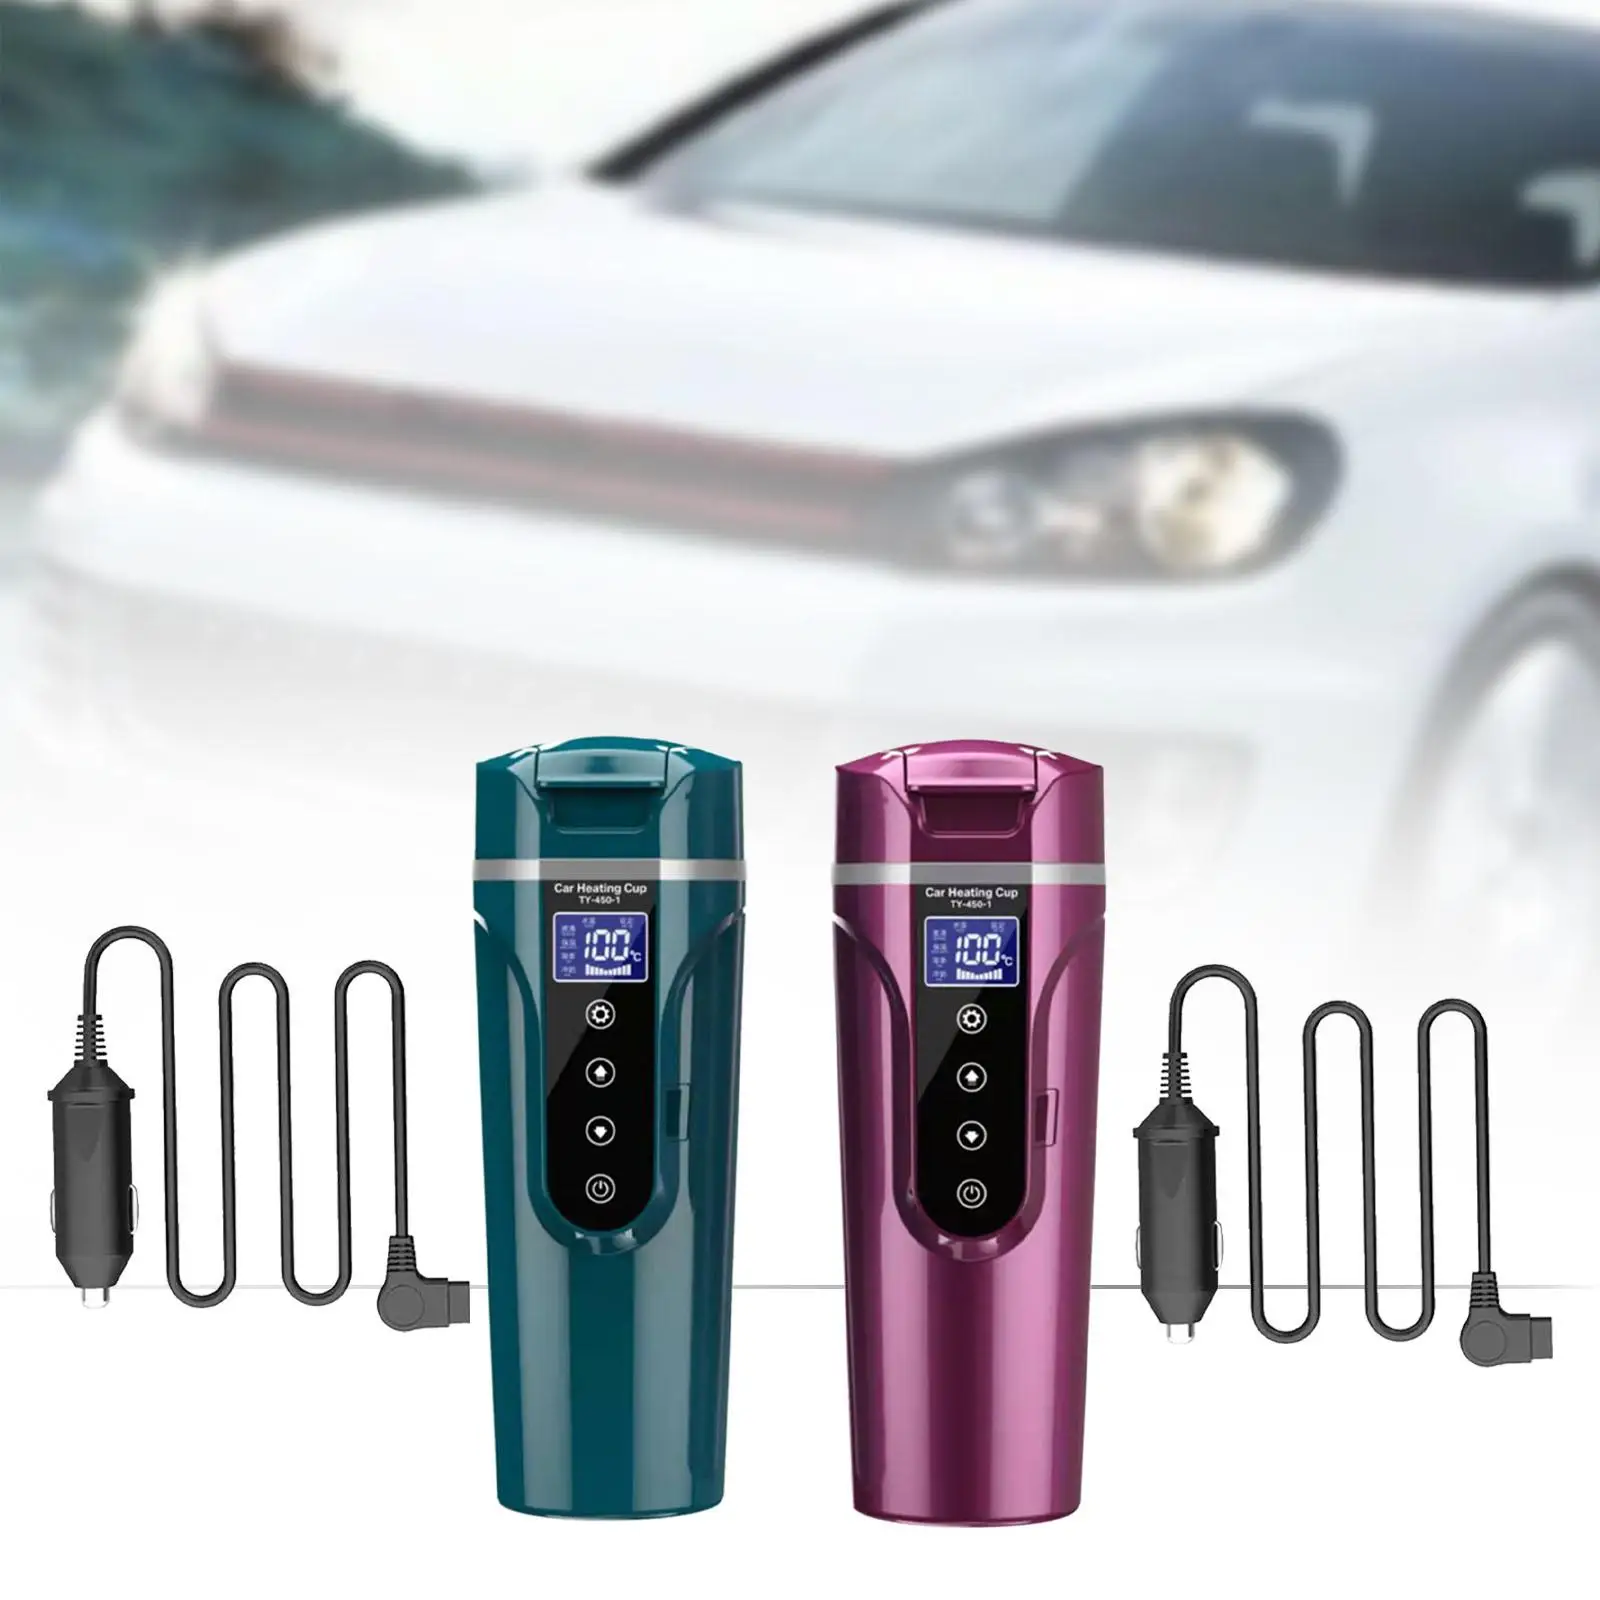 Car Heating Cup Fast Boiling Leakproof 12V/24V Travel Car Truck Kettle Car Travel Kettle Water Boiler for Tea Water Coffee Car